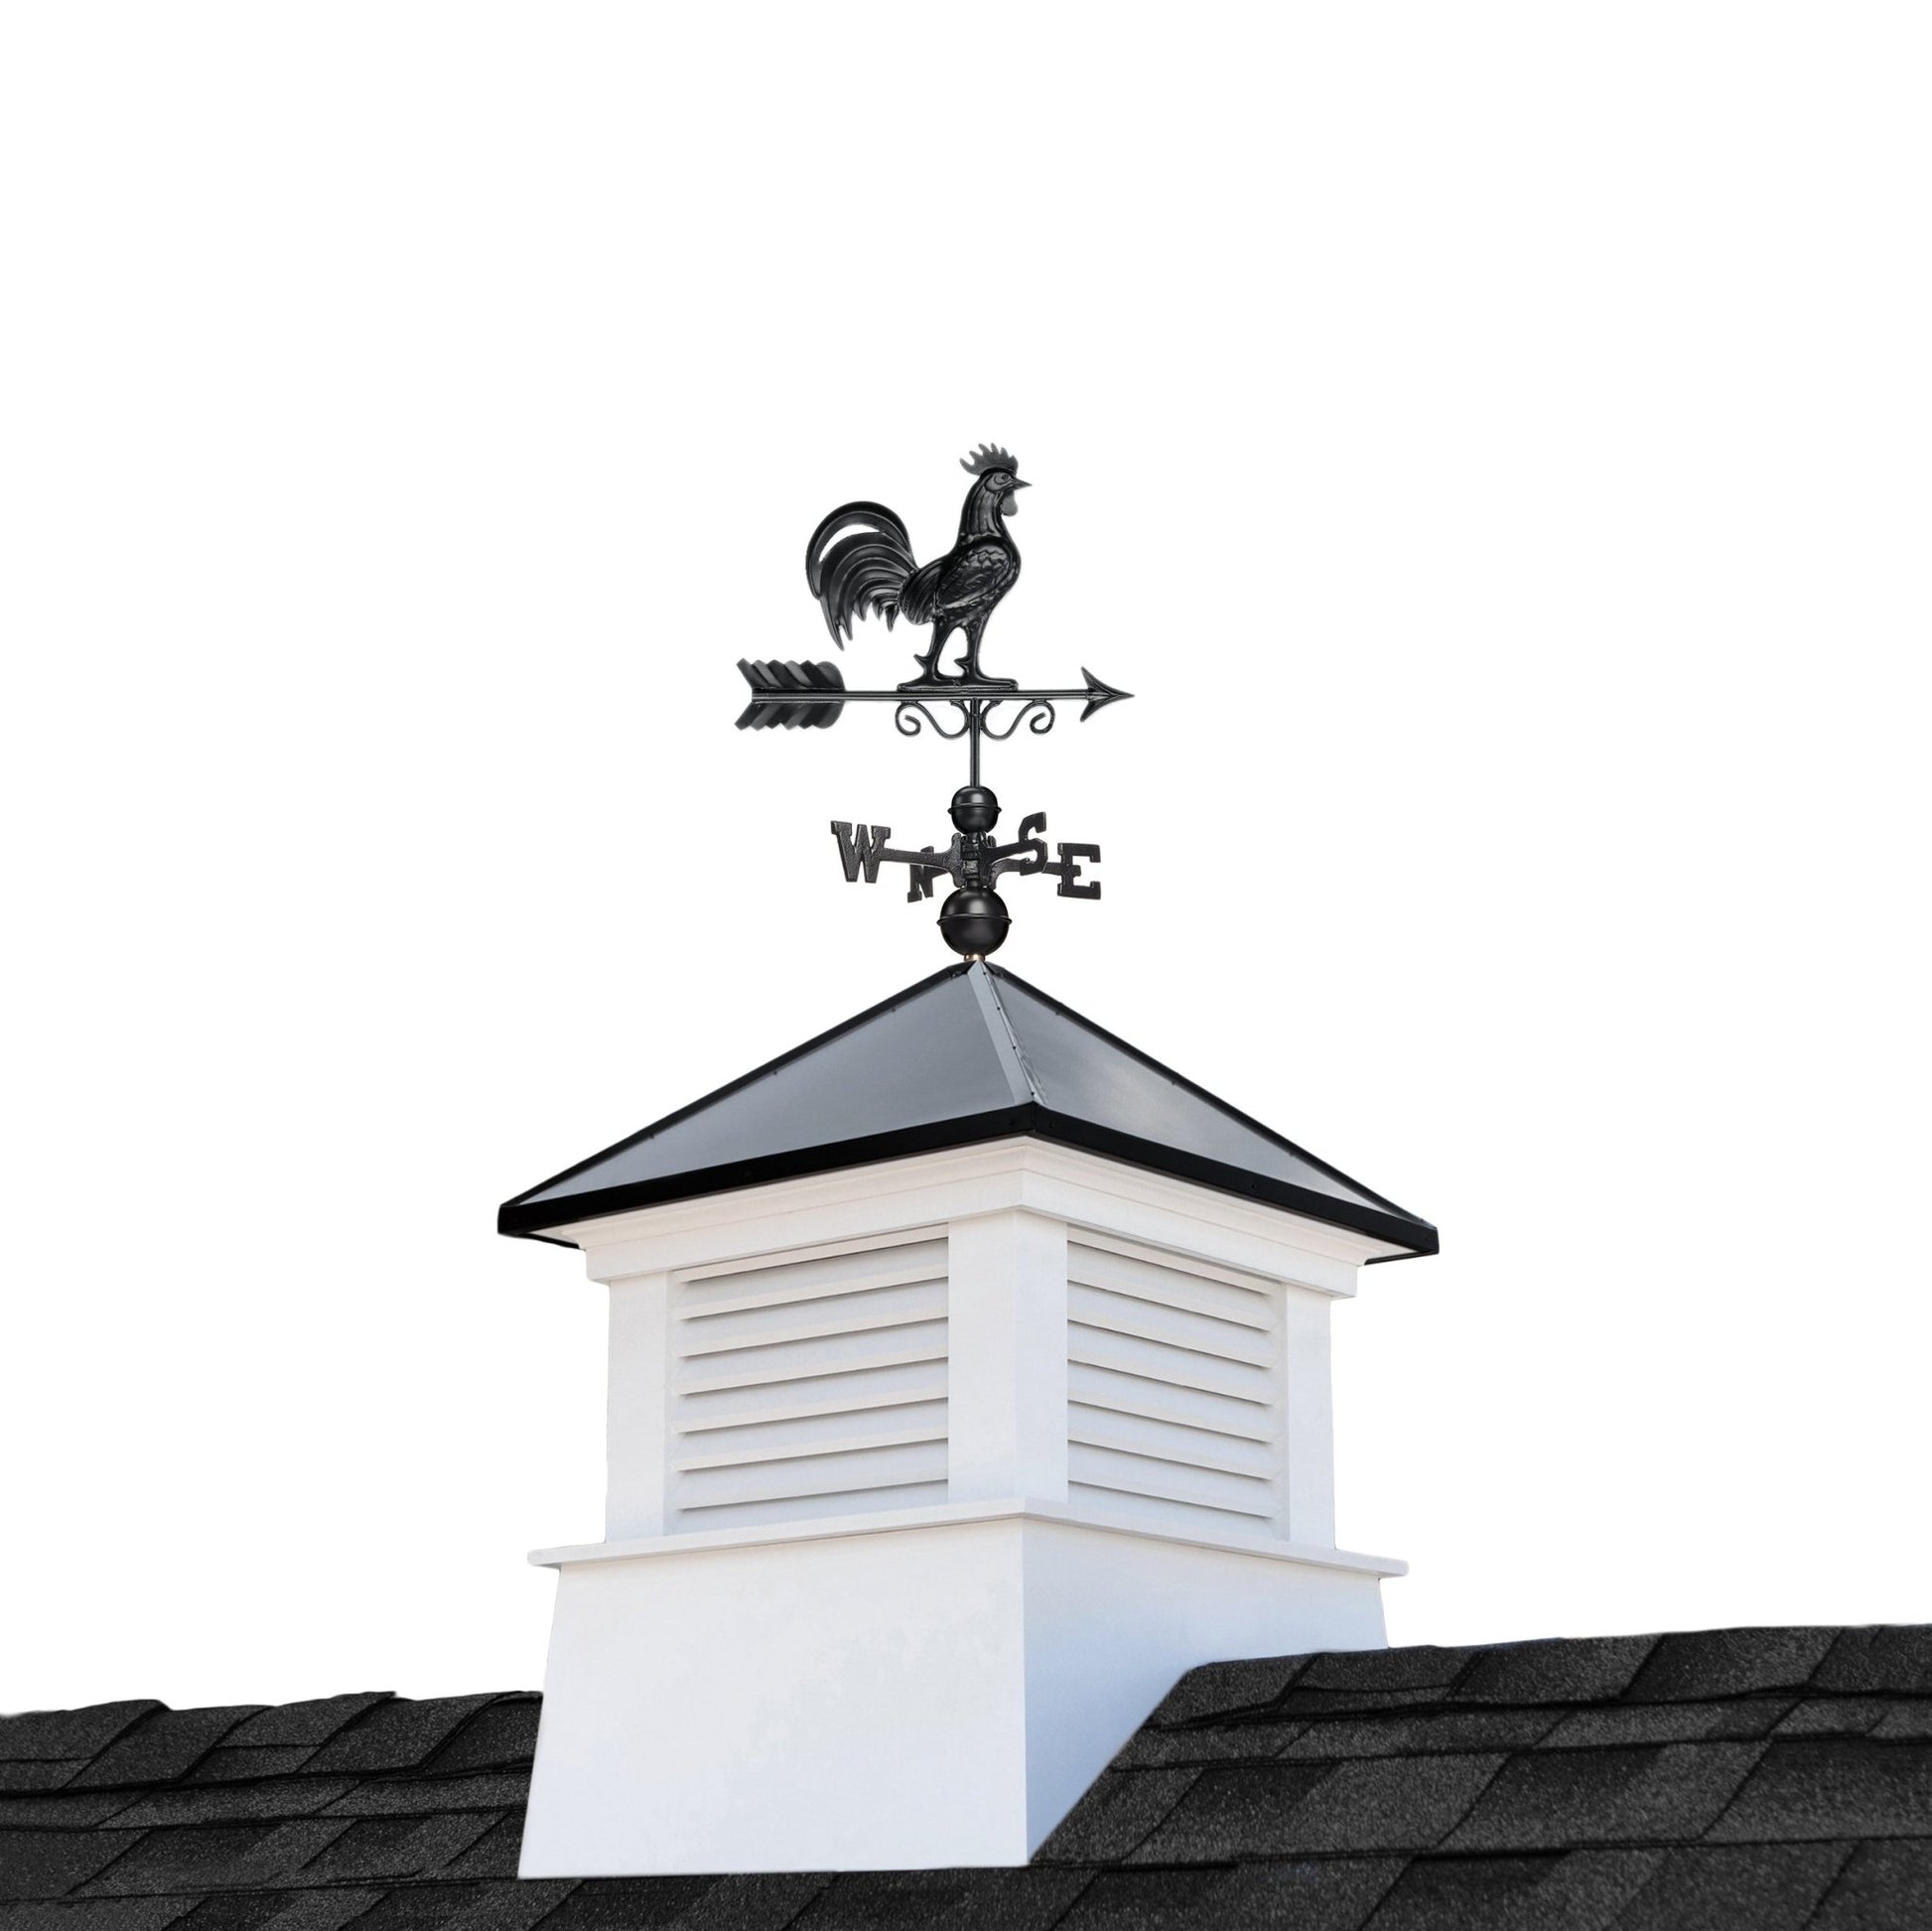 30" Square Manchester Vinyl Cupola with Black Aluminum roof and Black Aluminum Rooster Weathervane - Good Directions